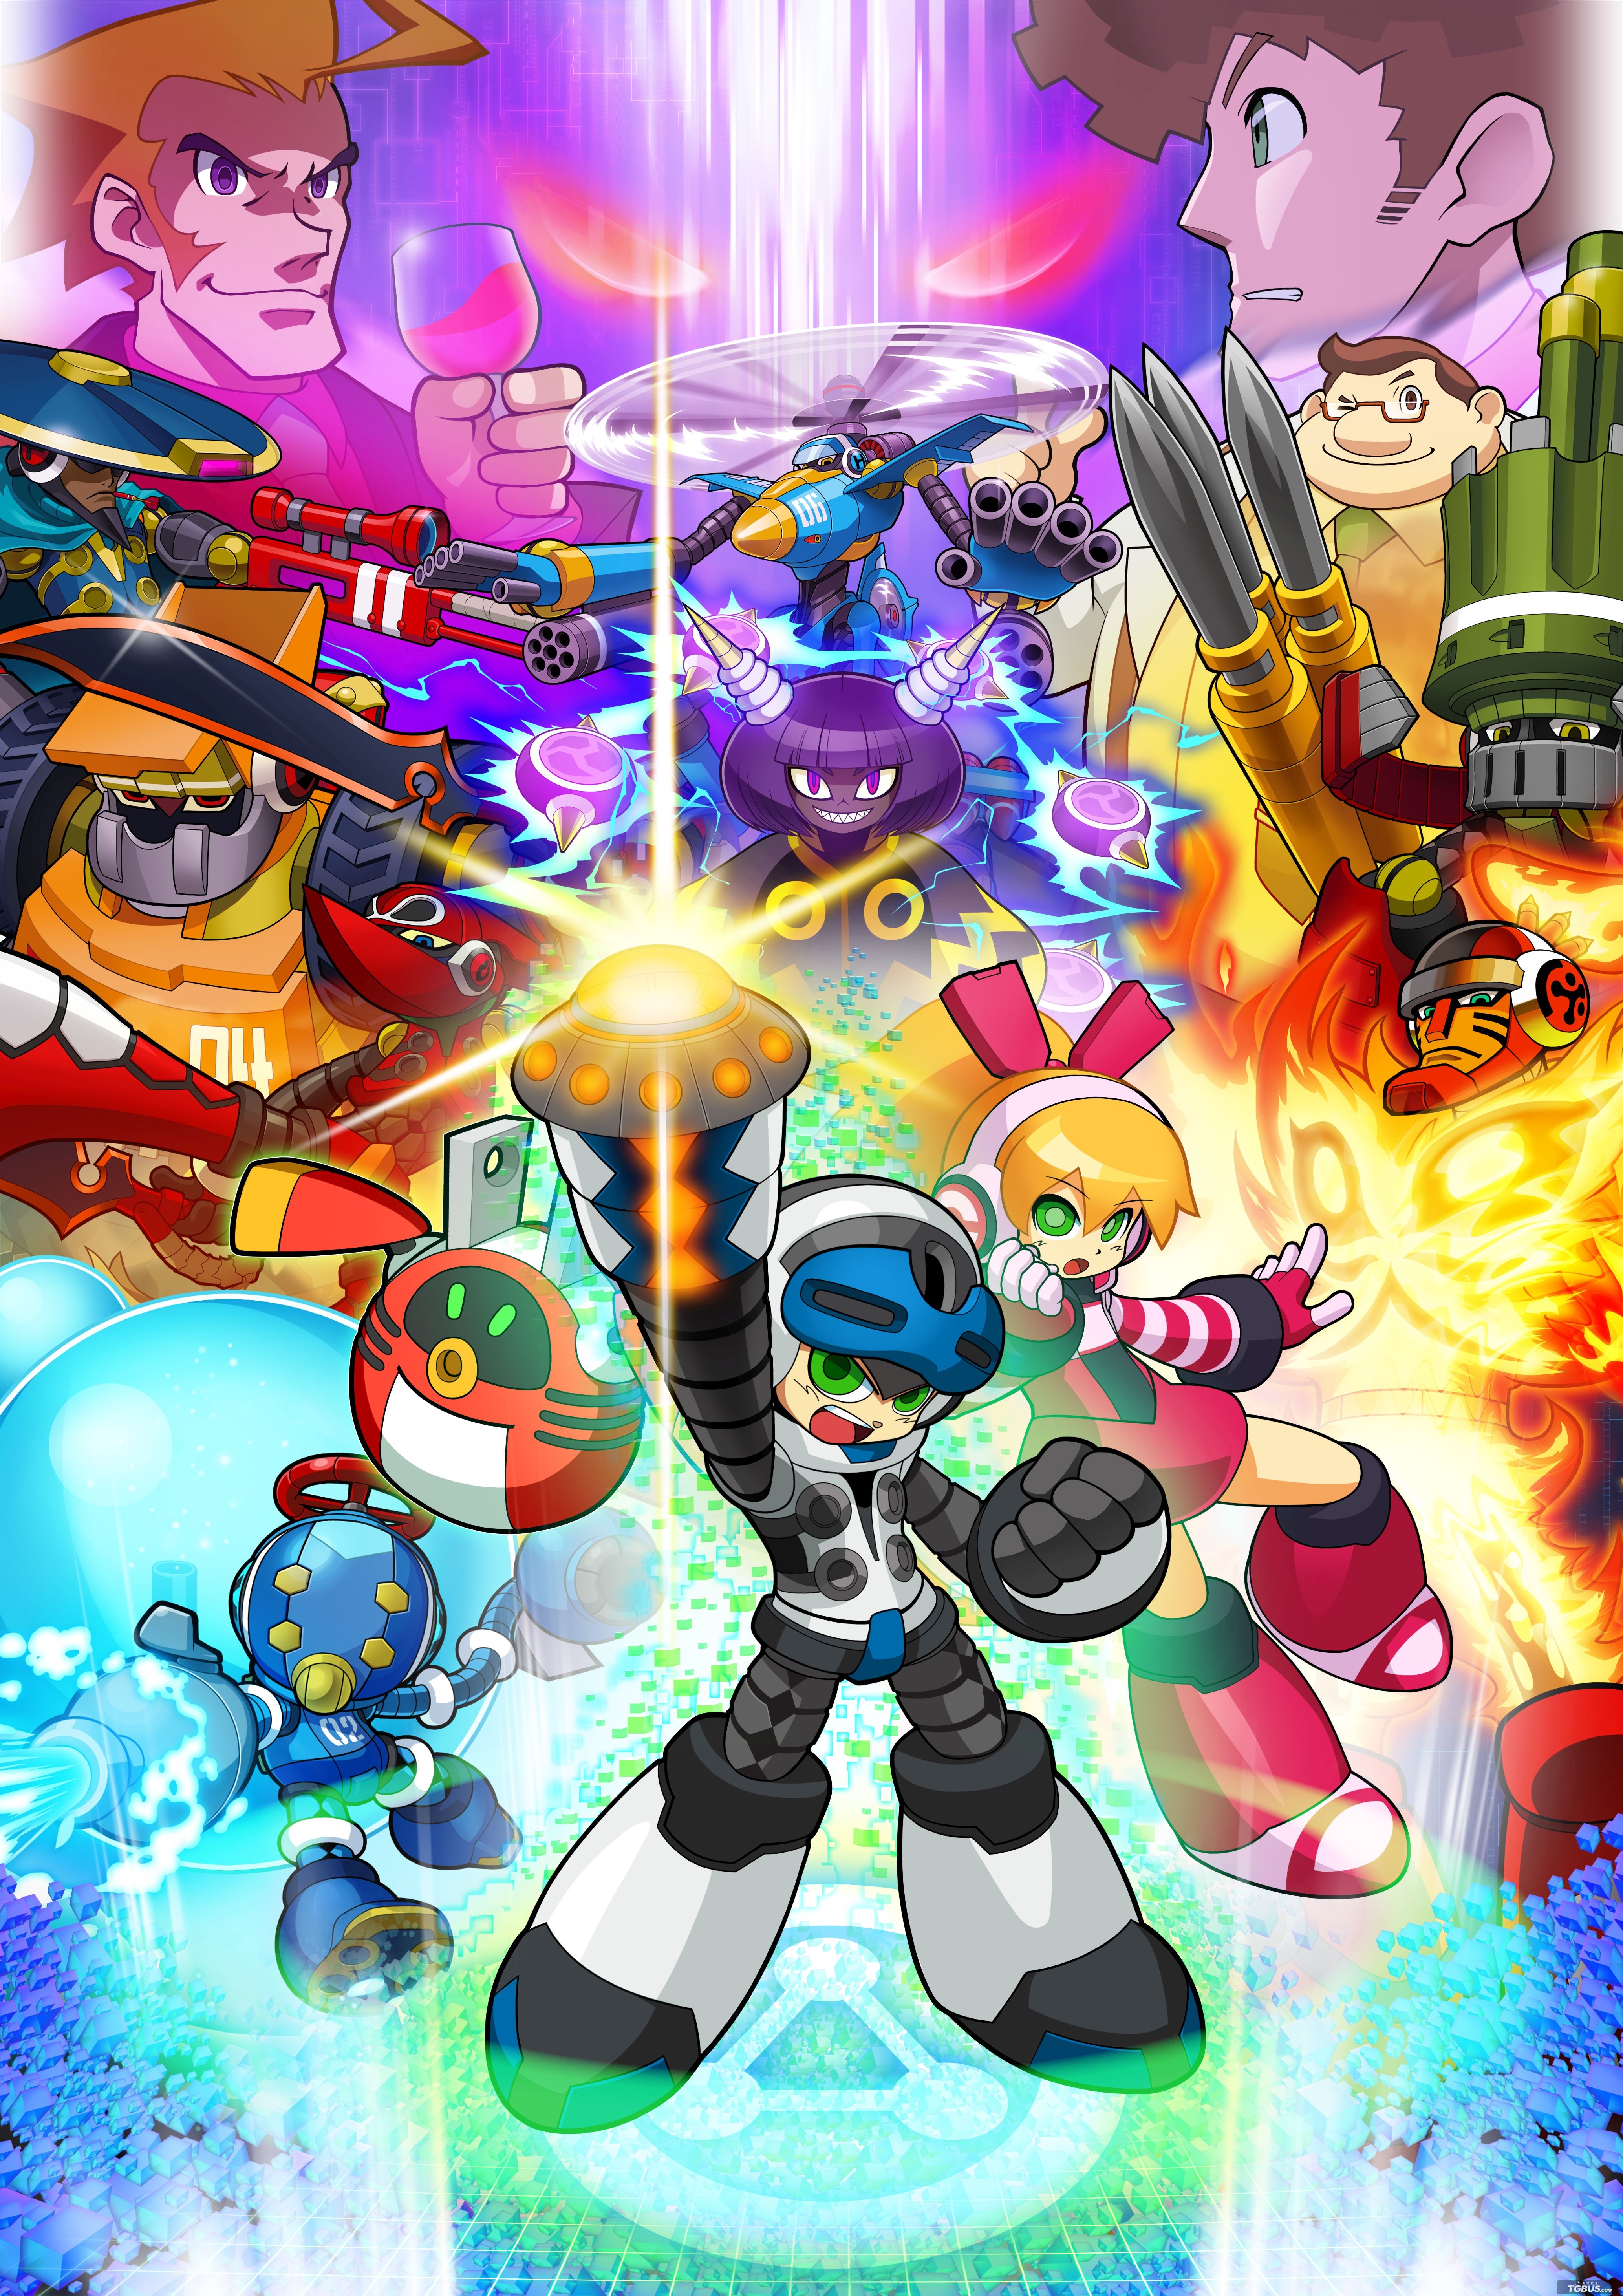 mighty no 9 release date download